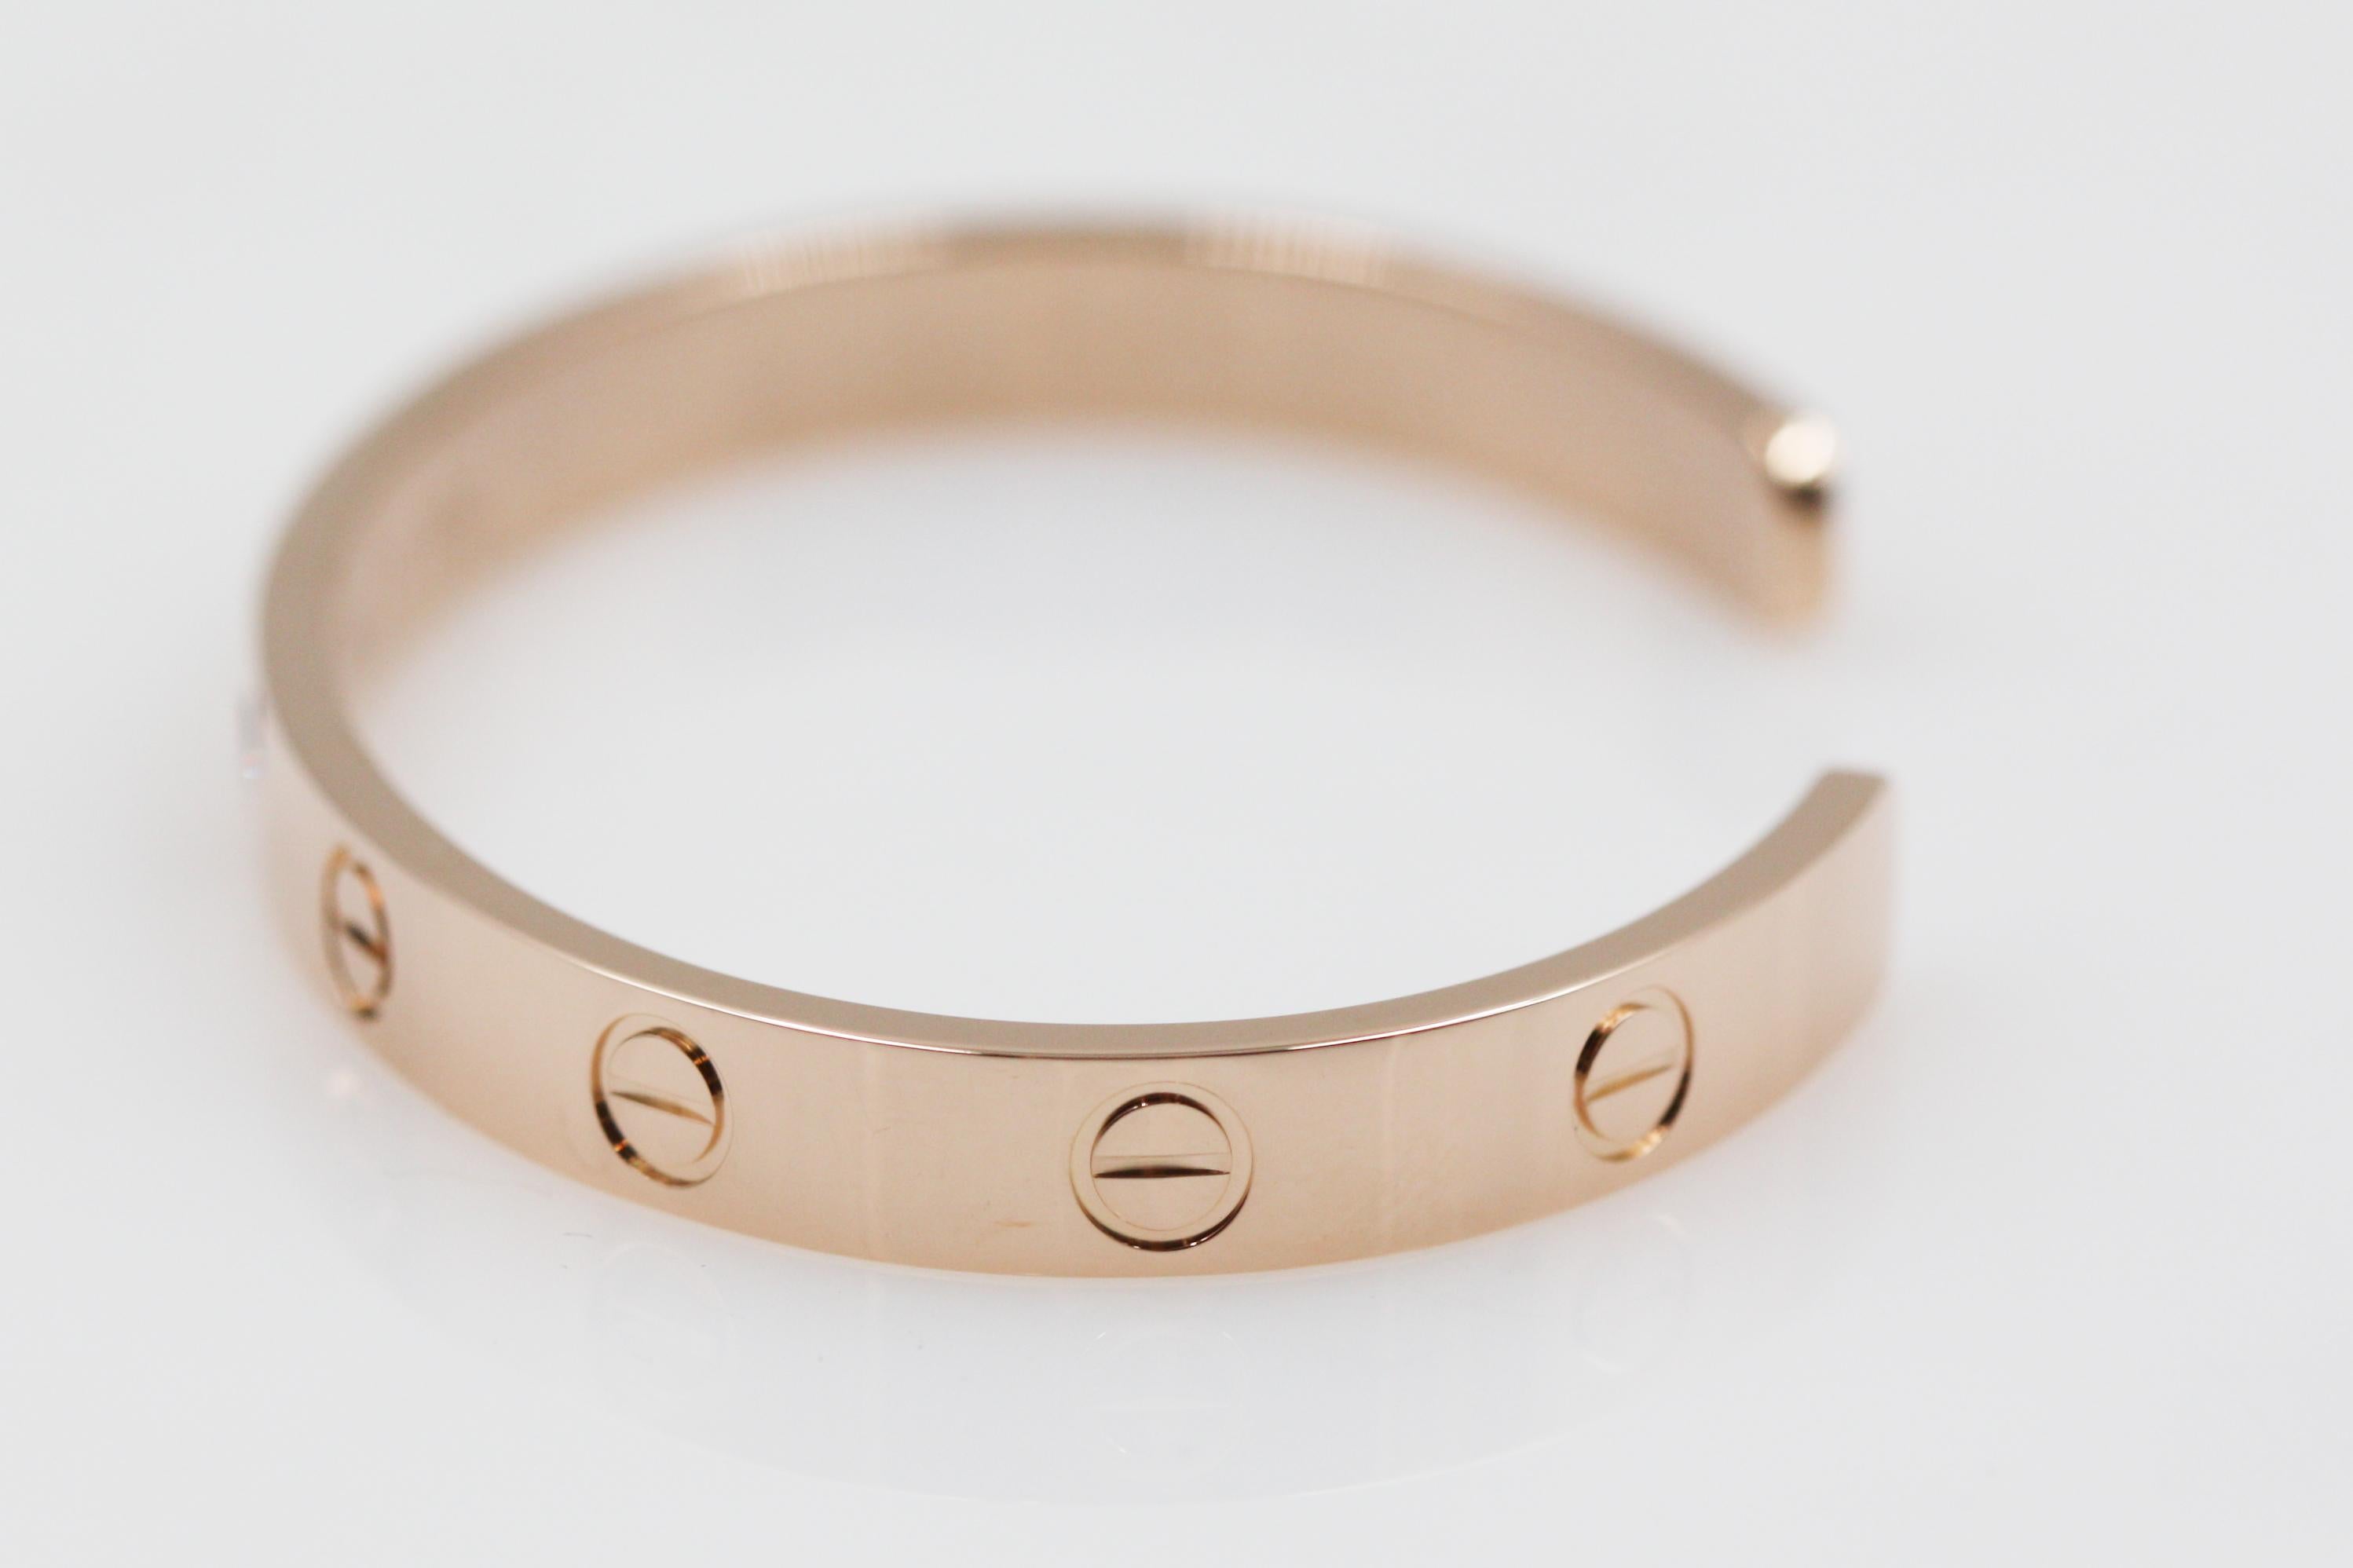 A beautiful cuff bracelet from Cartier Love collection, made in 18K rose gold. The bracelet have the iconic screw motif and set with 1 pink sapphire stone. 

Size: 16
We have other size available, please feel free to ask.

Item comes with an